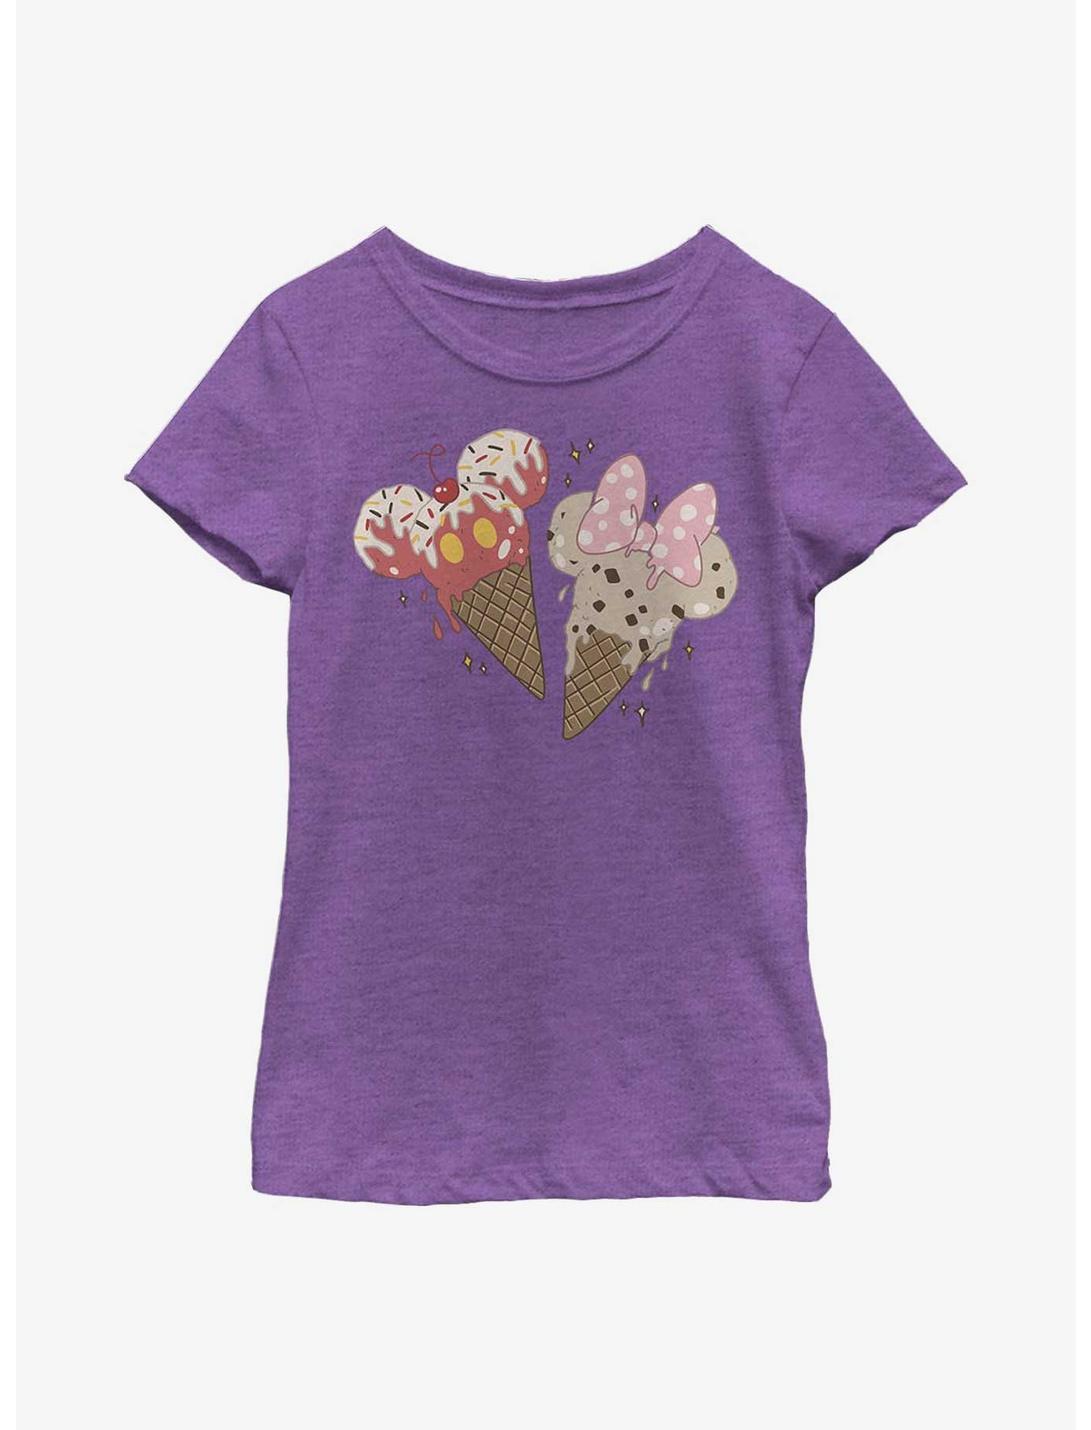 Disney Mickey Mouse Mickey Minnie Cones Youth Girls T-Shirt, PURPLE BERRY, hi-res